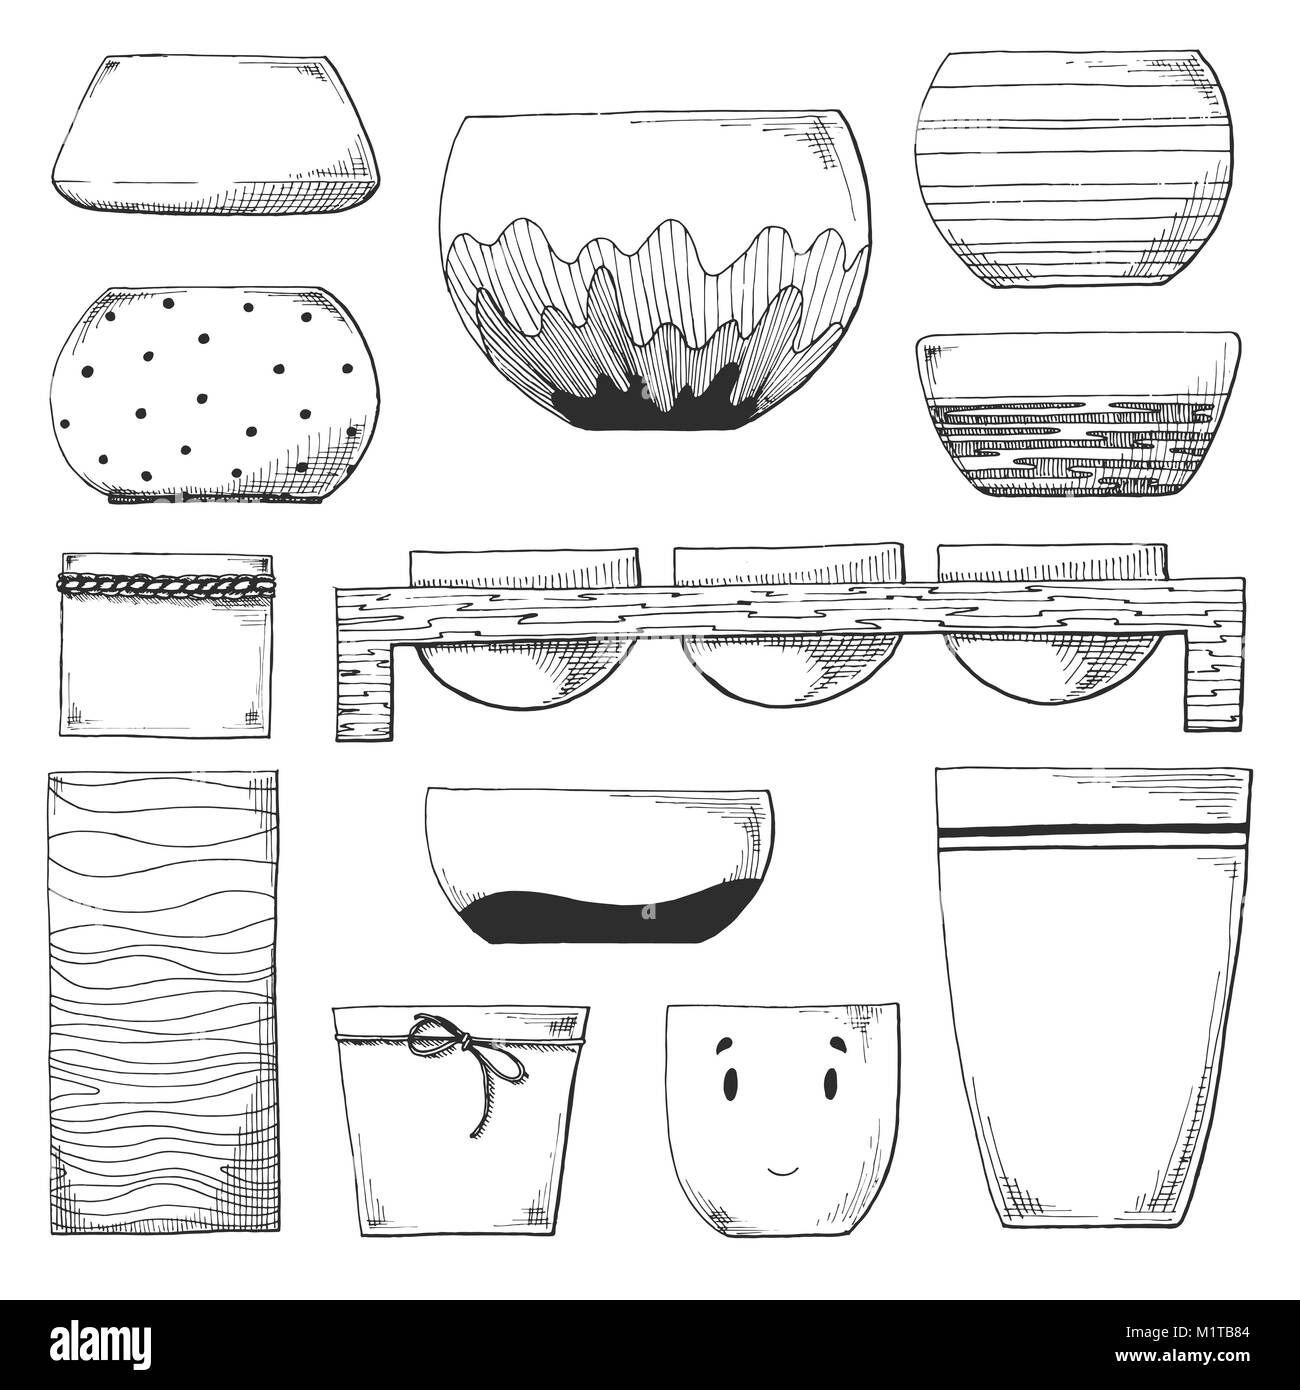 Sketch plant pots. Vector illustration of a sketch style. Stock Vector